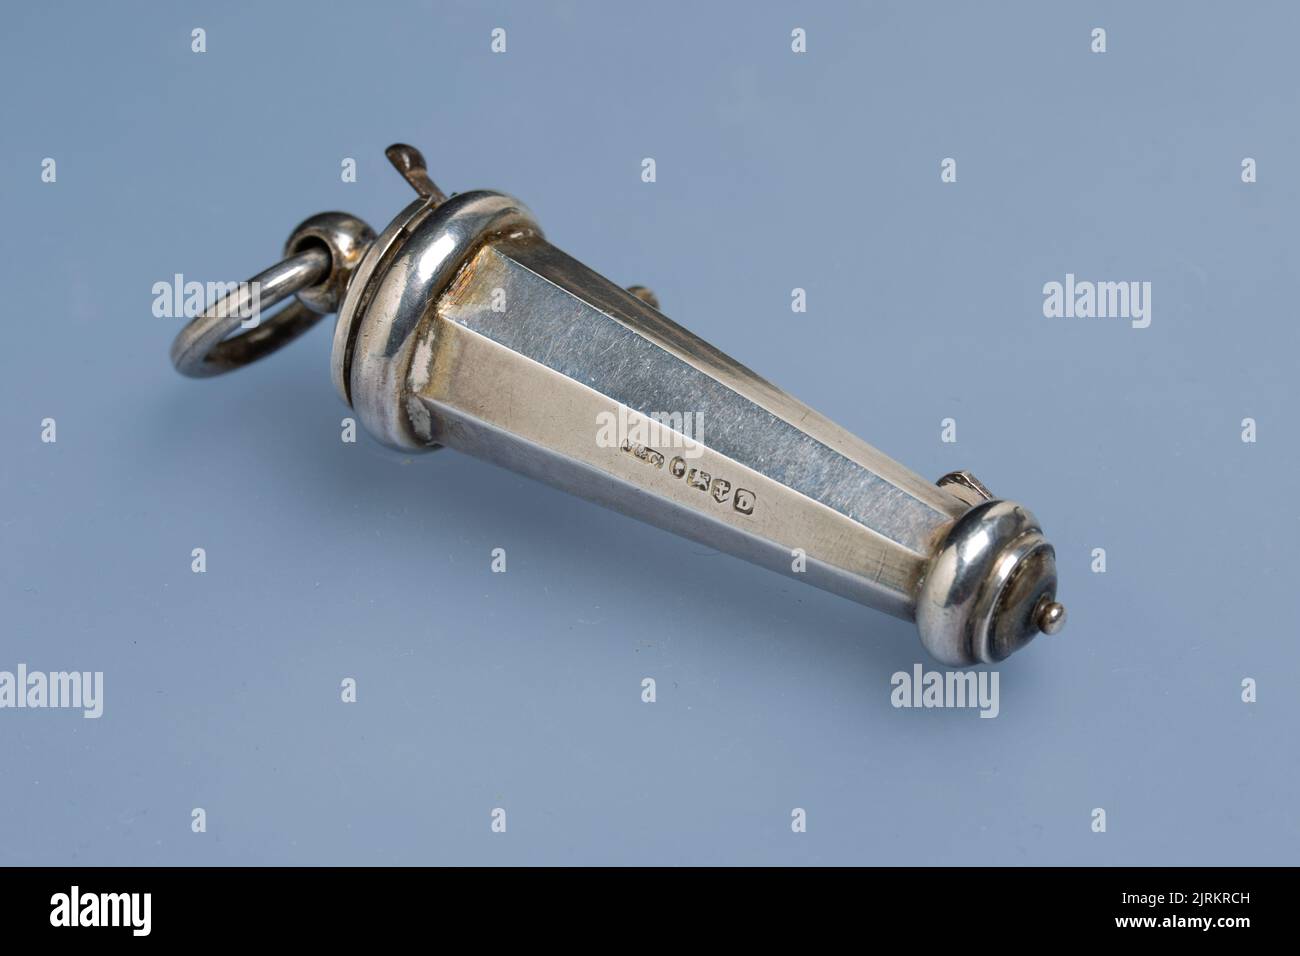 Silver cross-belt whistle as issued to military officiers, fire officers, etc., made of silver and hallmarked Jennens and Co.,1852, Victorian, ninetee Stock Photo